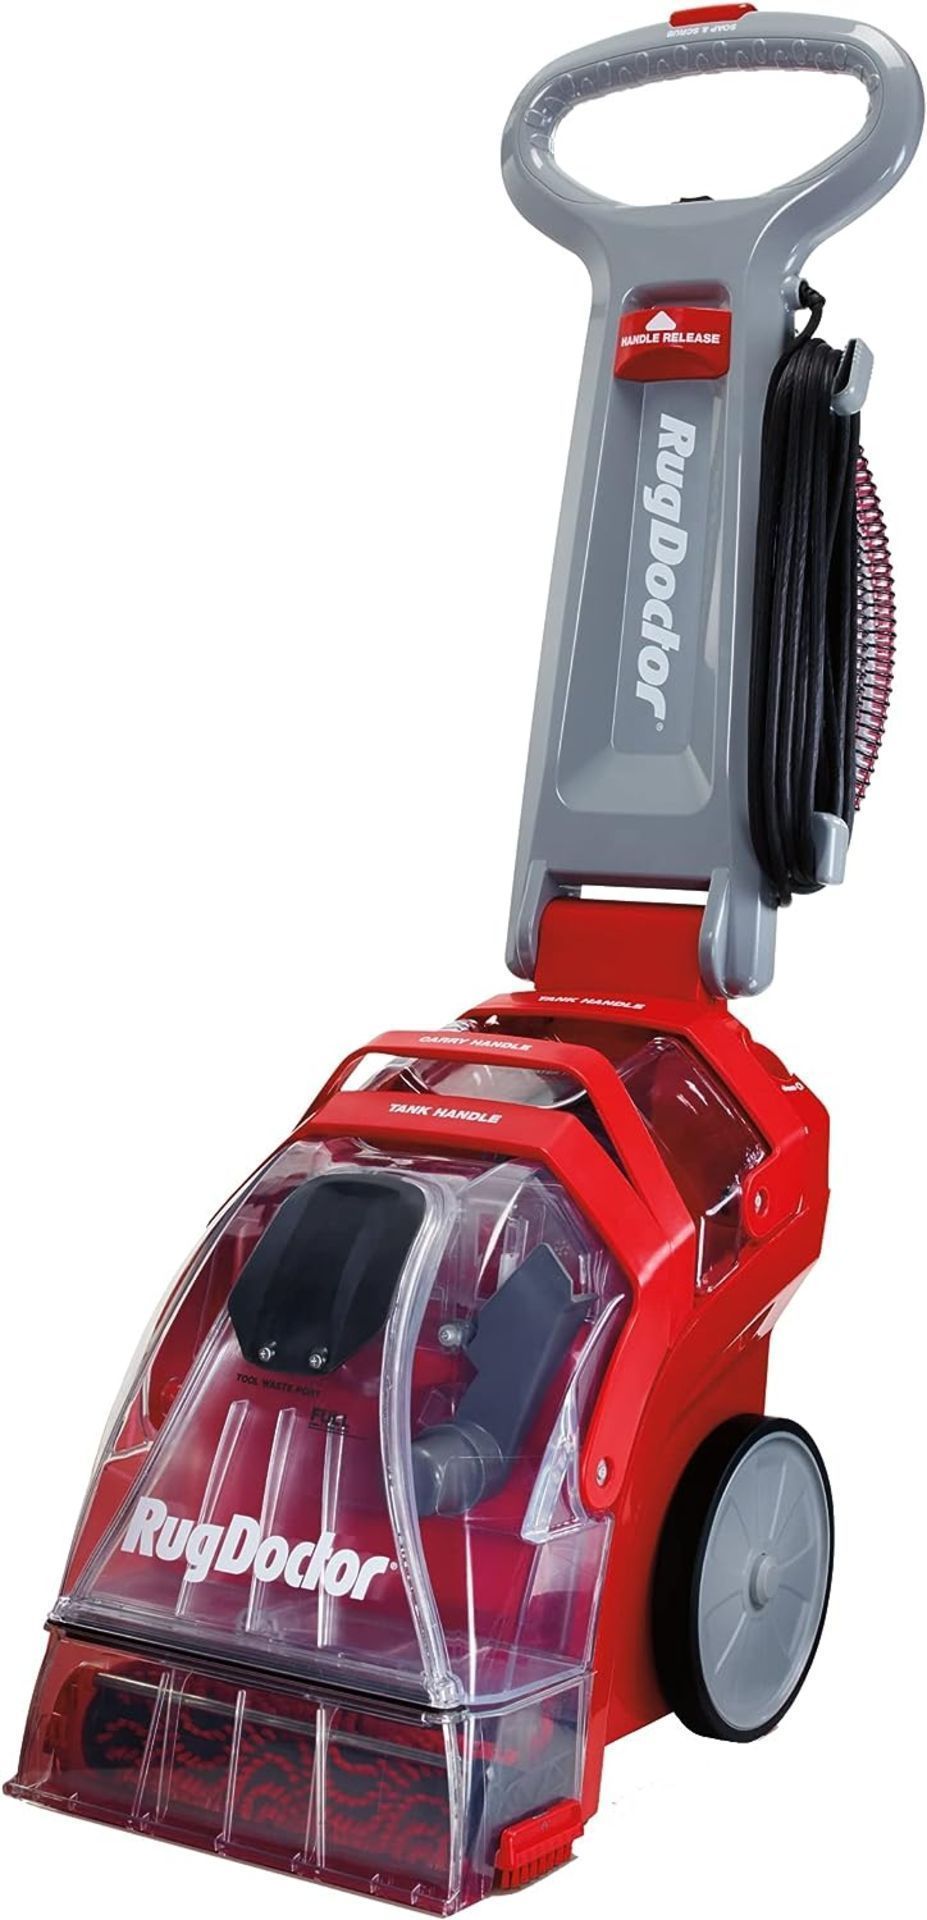 Brand New Rug Doctor 1093170 R6-7 Deep Carpet Cleaner, Red with 6l Cleaning Solution RRP £299, Our